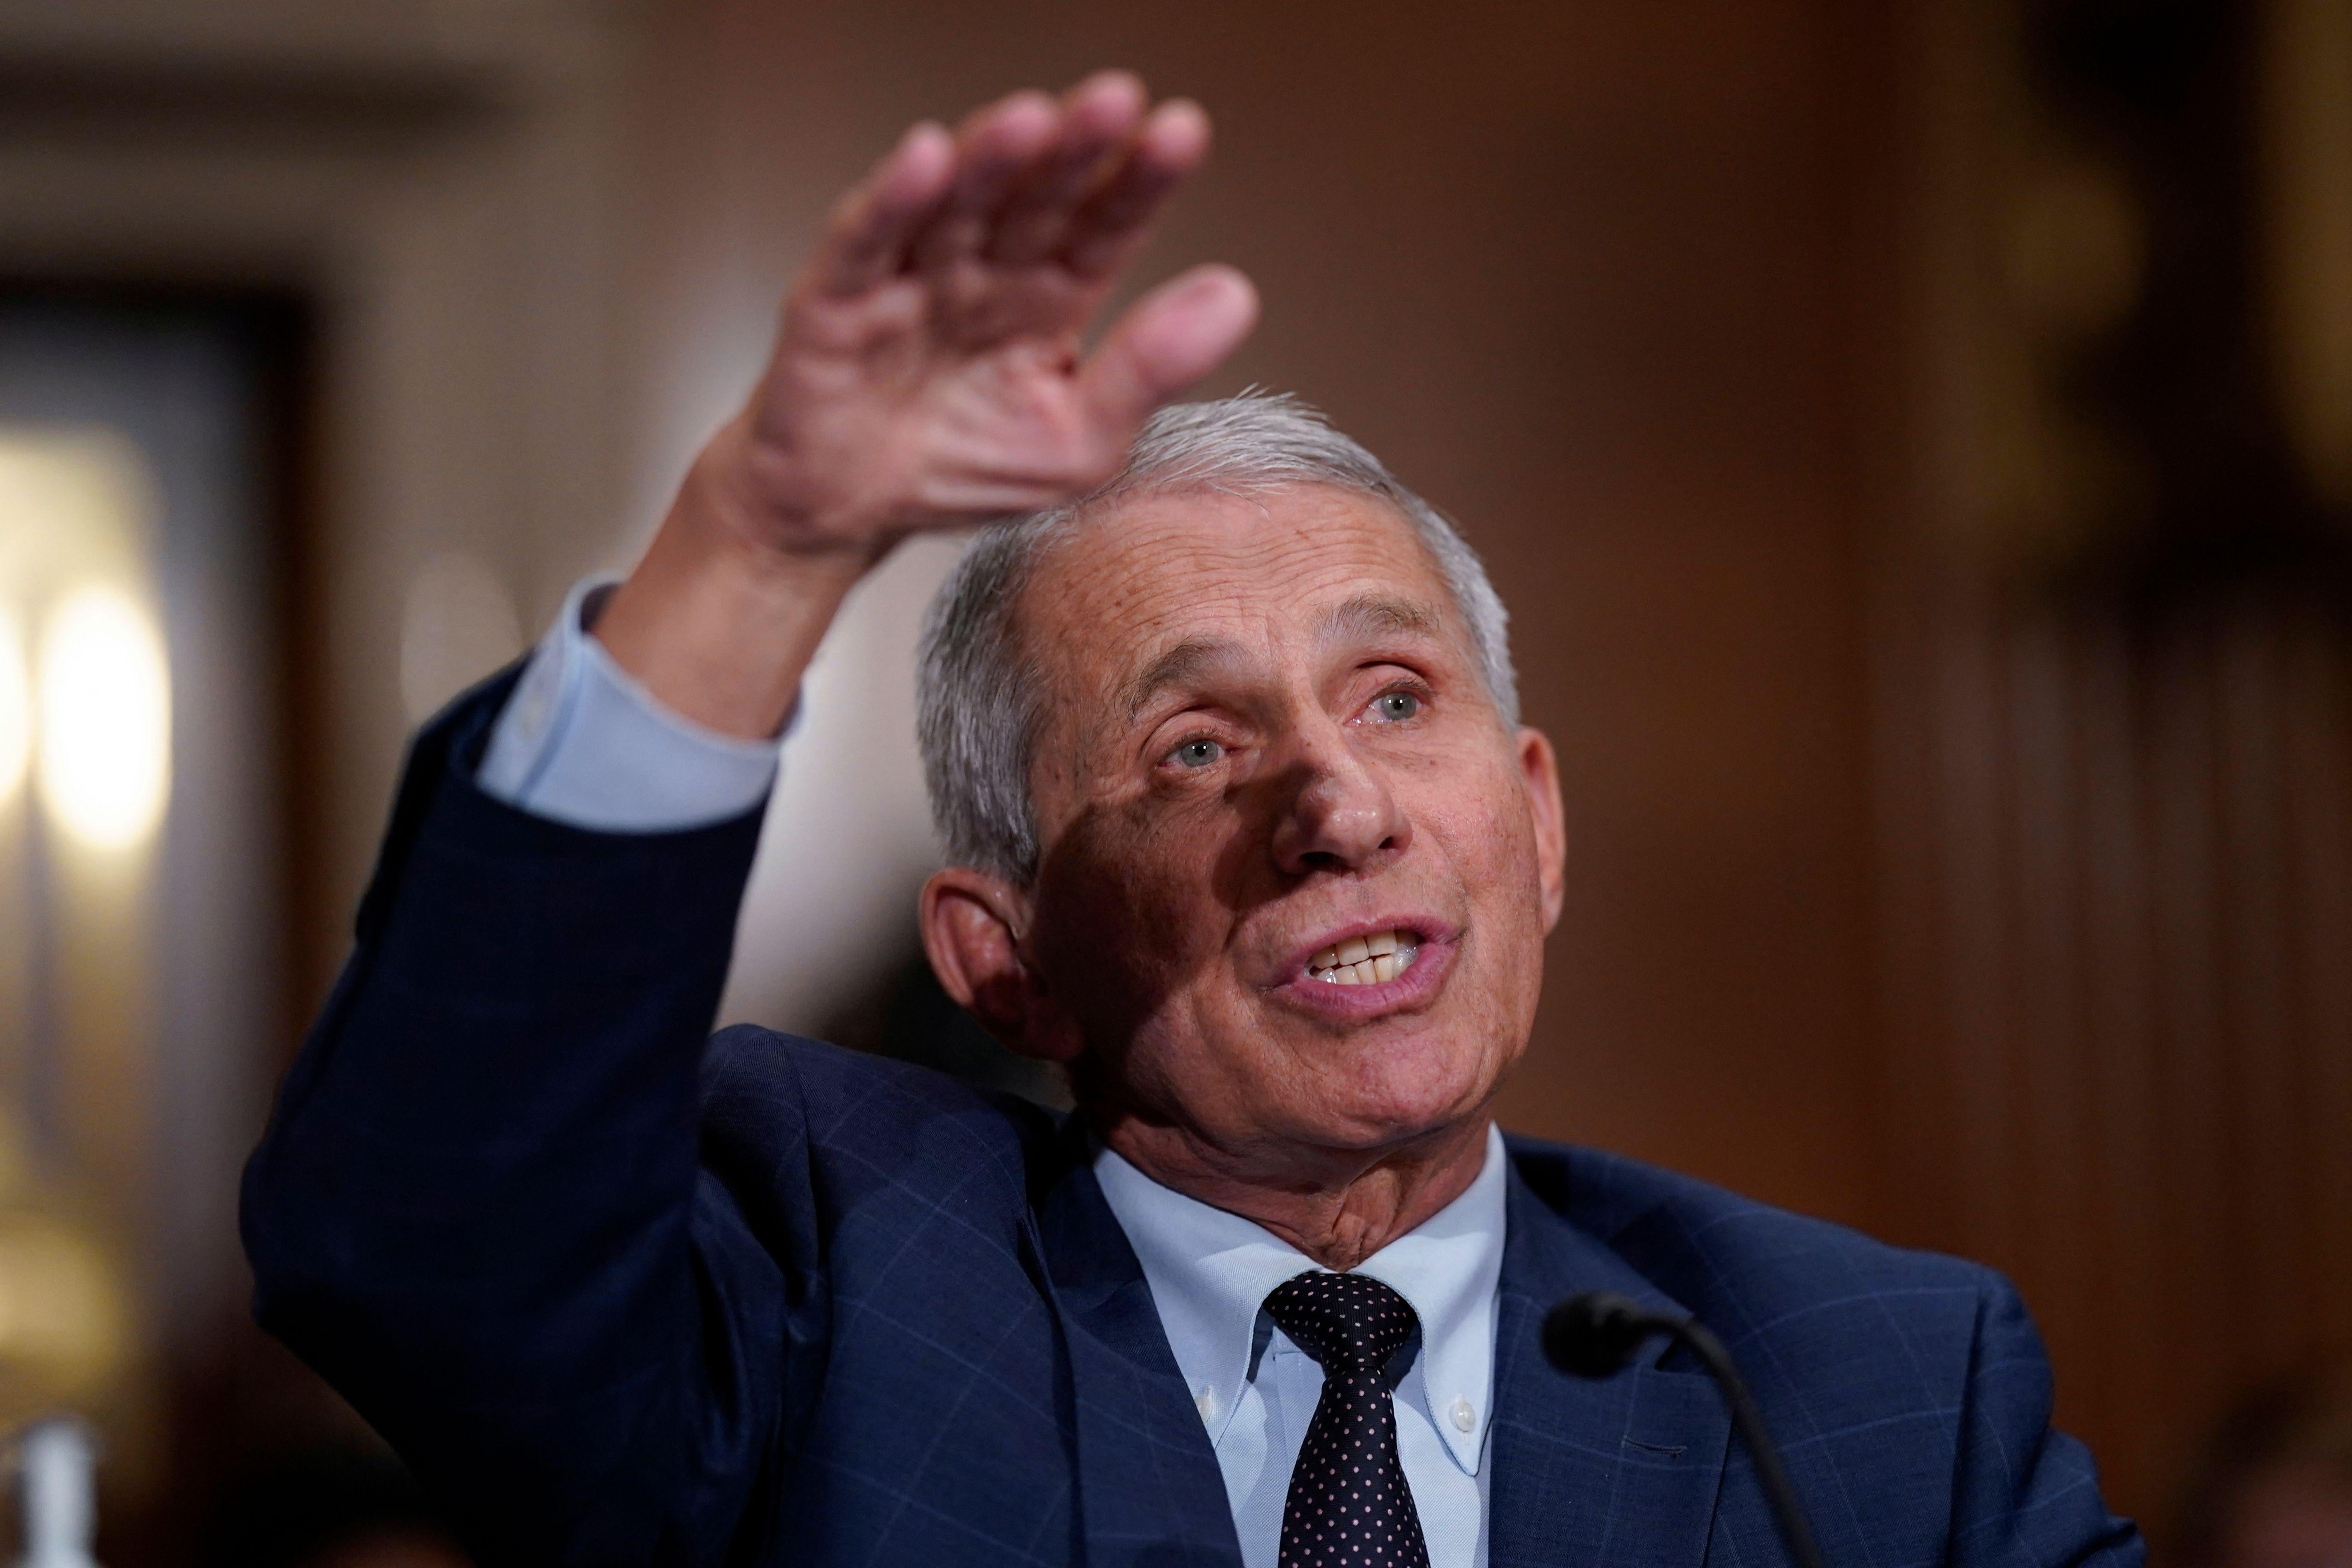 Dr. Anthony Fauci, director of the National Institute of Allergy and Infectious Diseases, responds to questions by Senator Rand Paul during the Senate Health, Education, Labor, and Pensions Committee hearing on Capitol Hill in Washington, D.C. on July 20, 2021. 